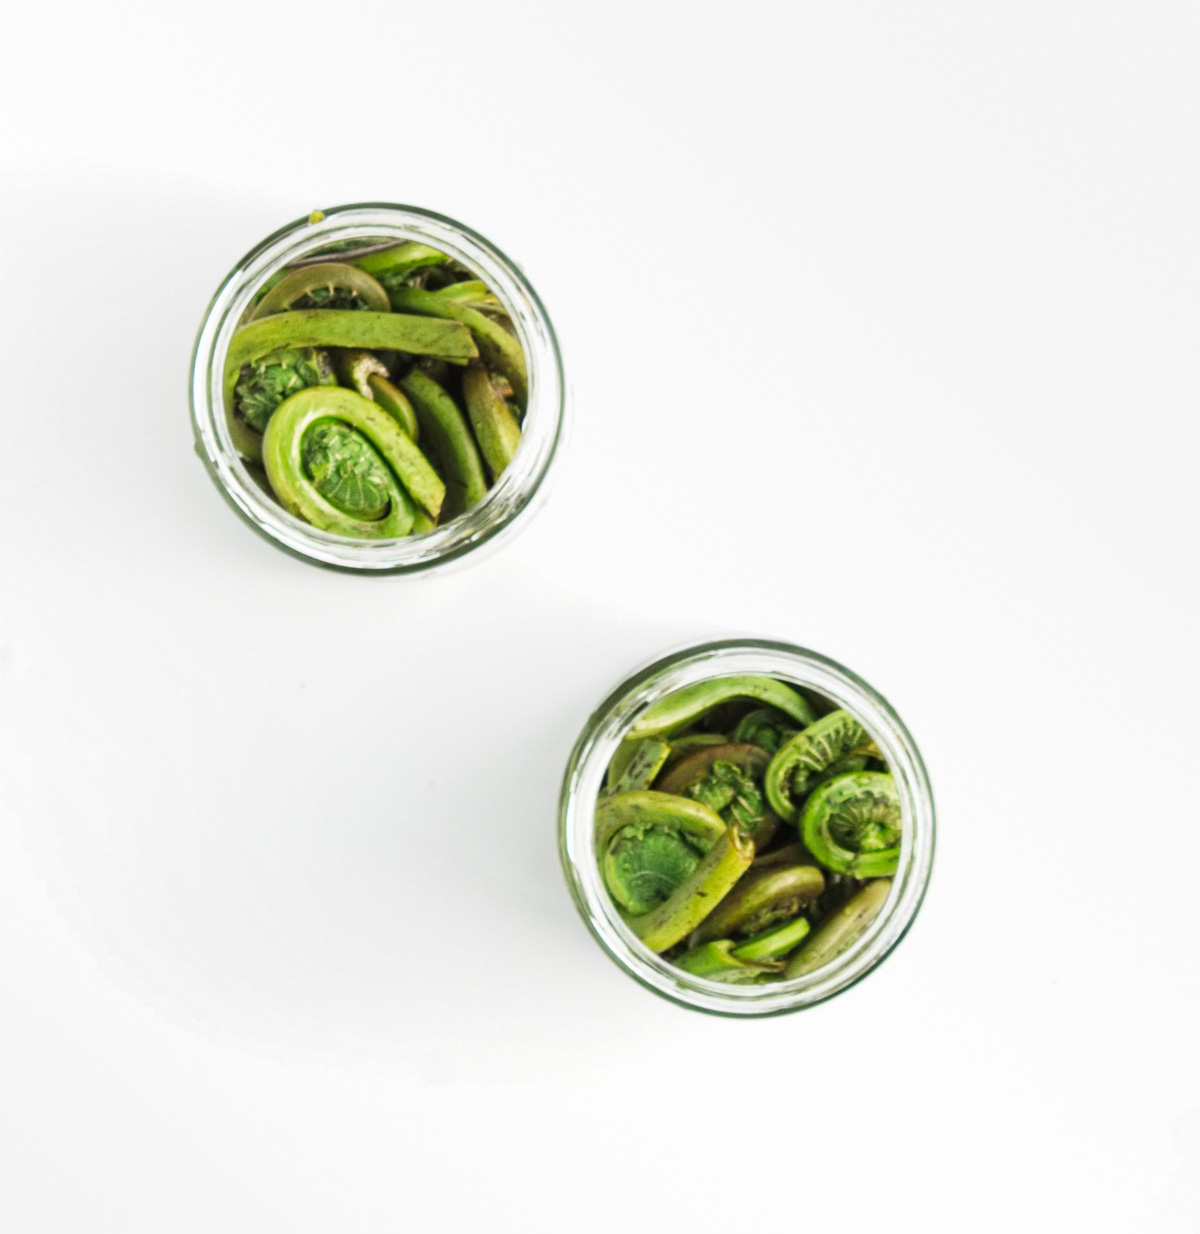 Blanched fiddleheads stuffed into pickling jars